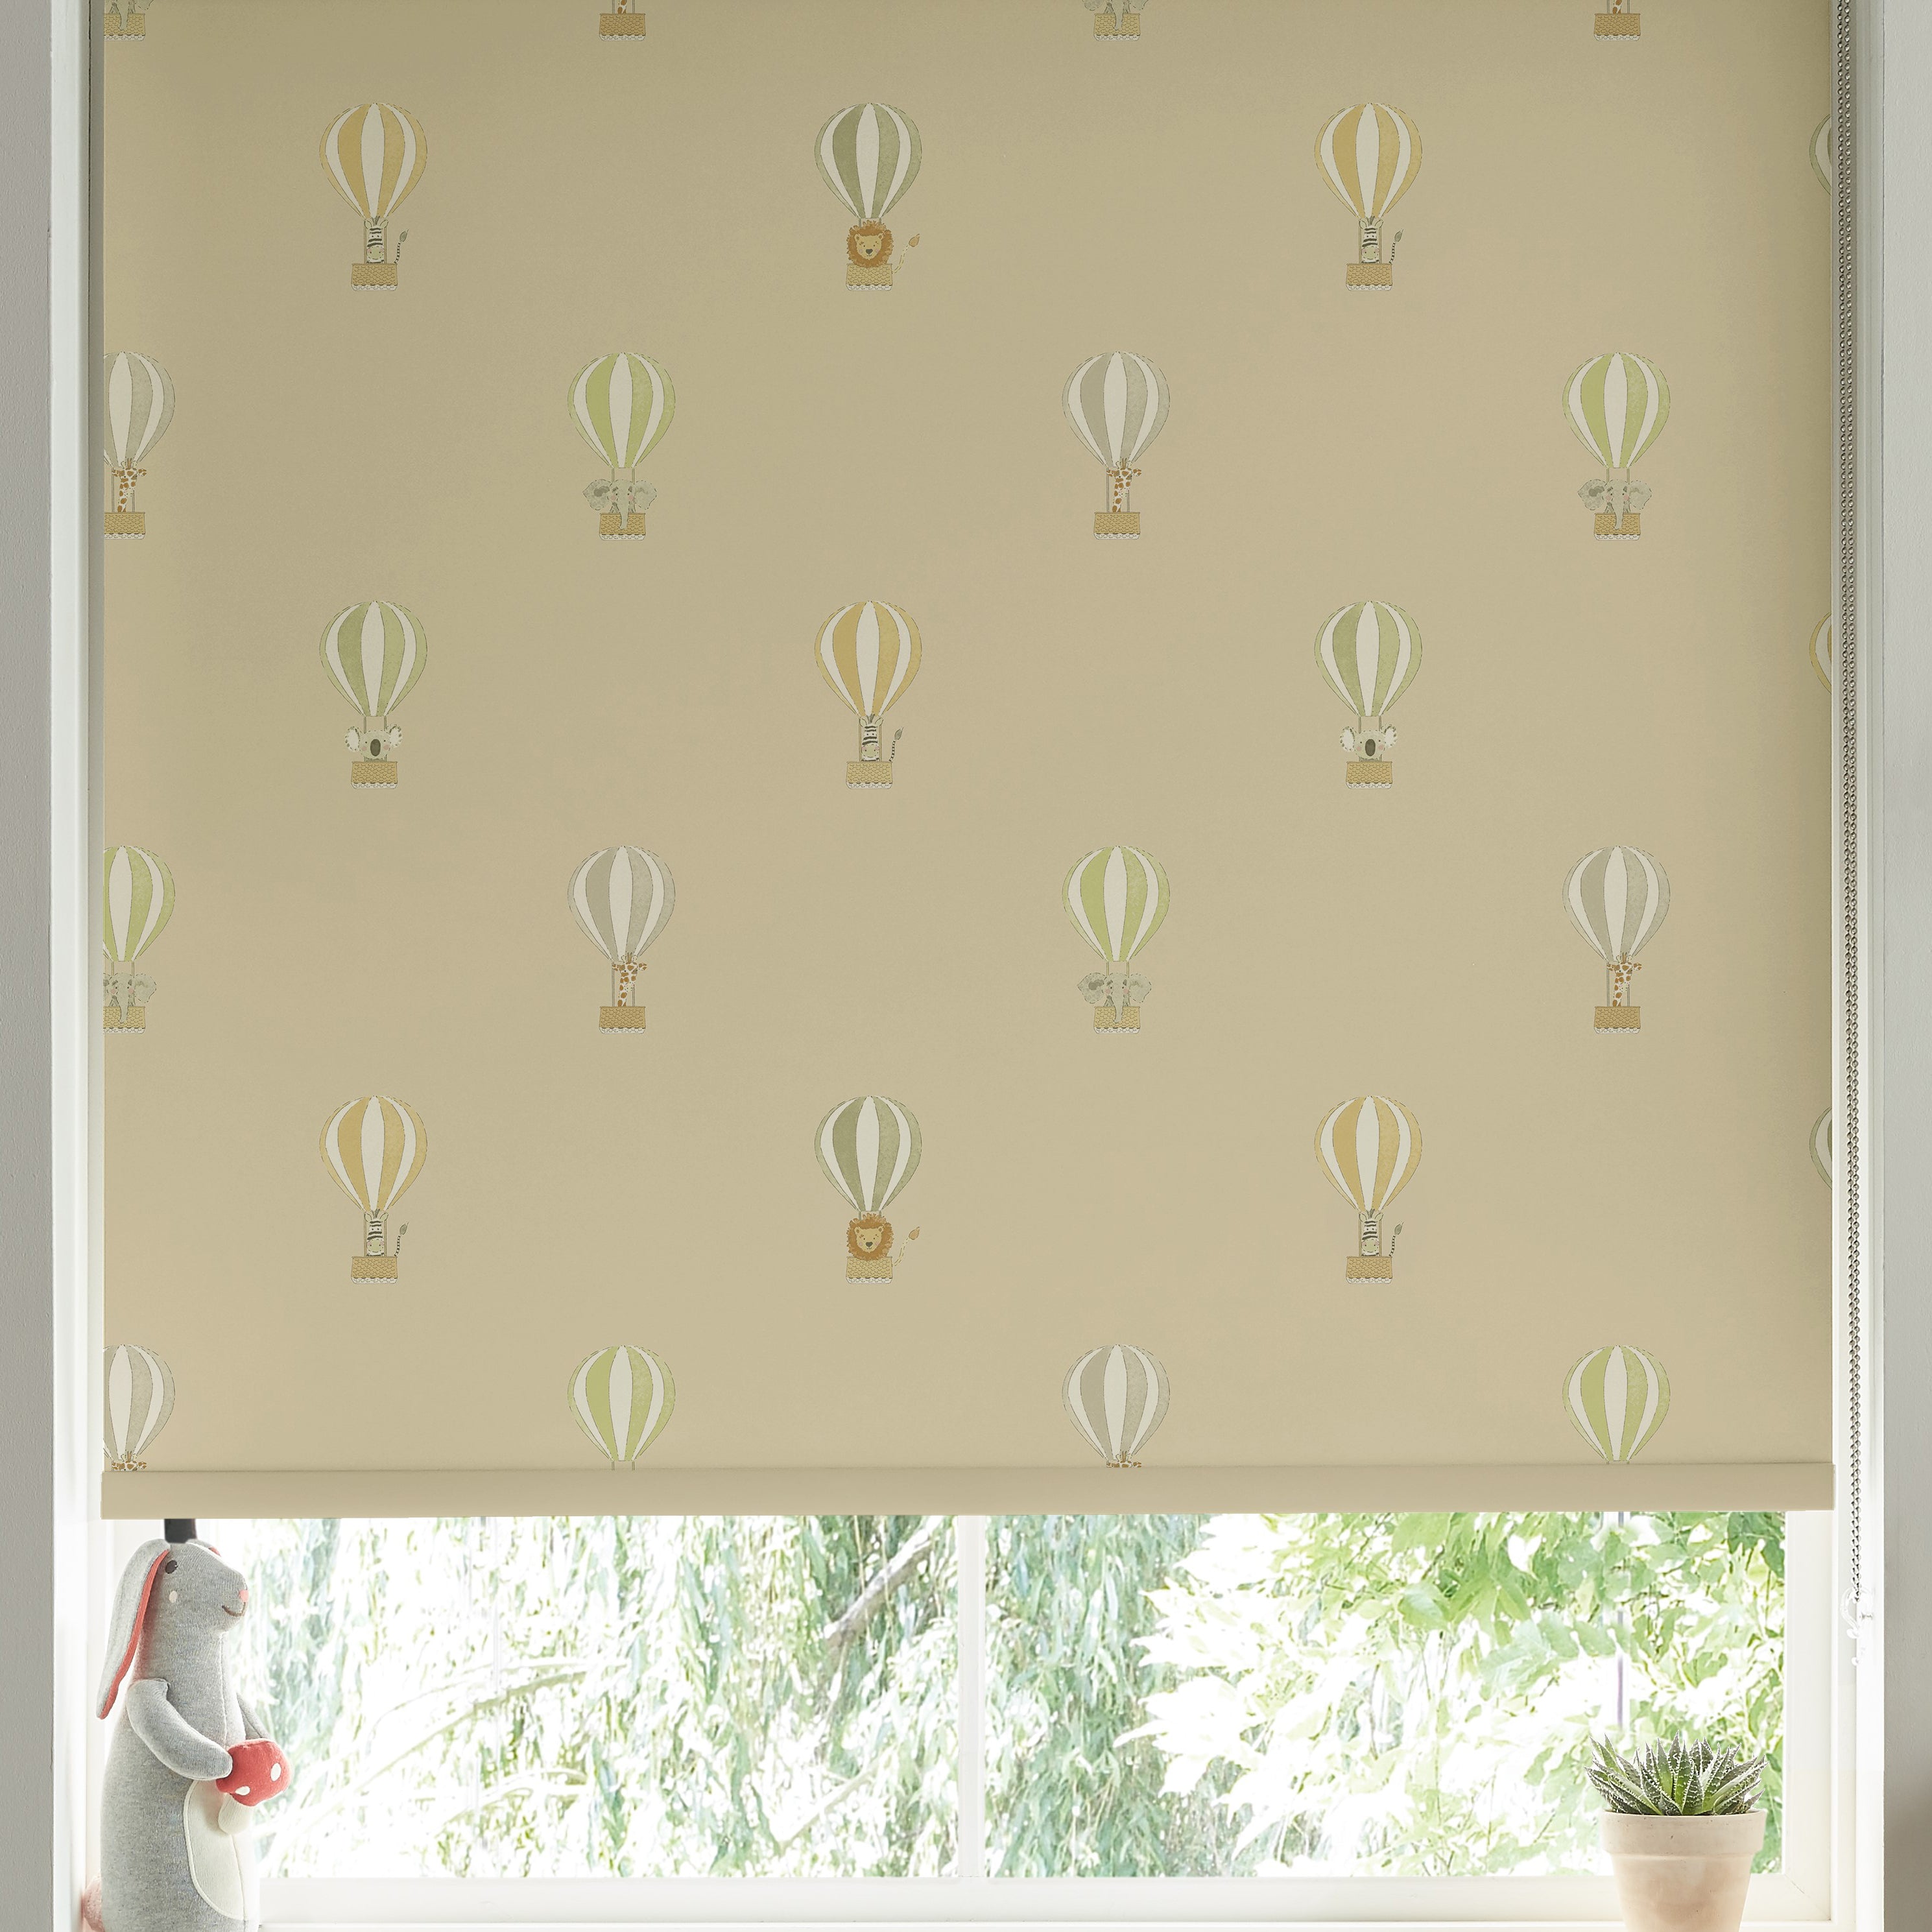 Sophie Allport Bears And Balloons Made To Measure Roller Blind Pale Rust Gold